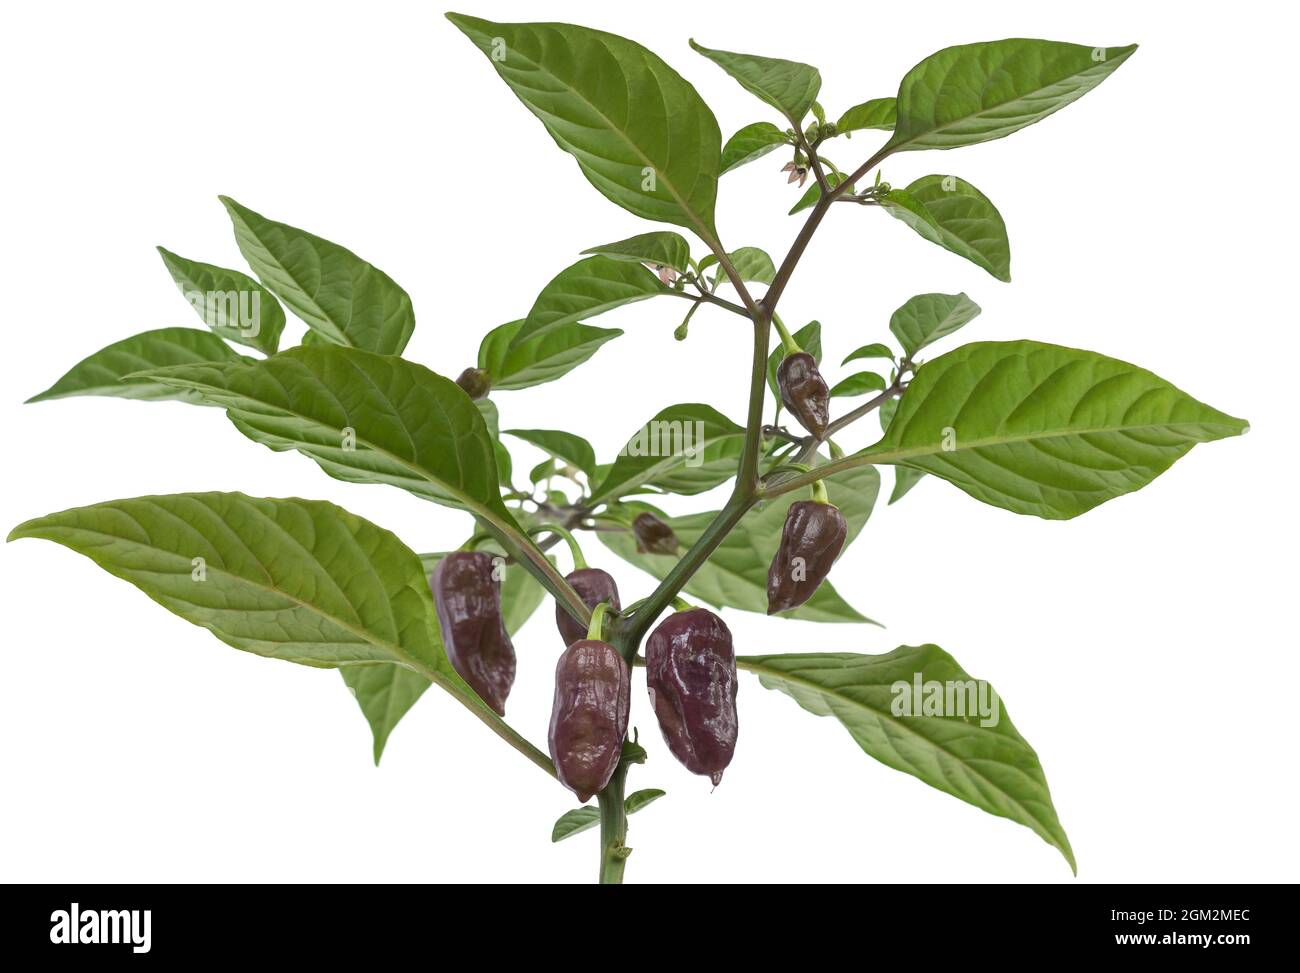 hottest capsicum chinense, habanero chilli peppers plant with purple chilli peppers, green chilli plant with leaves and flowers isolated in white Stock Photo